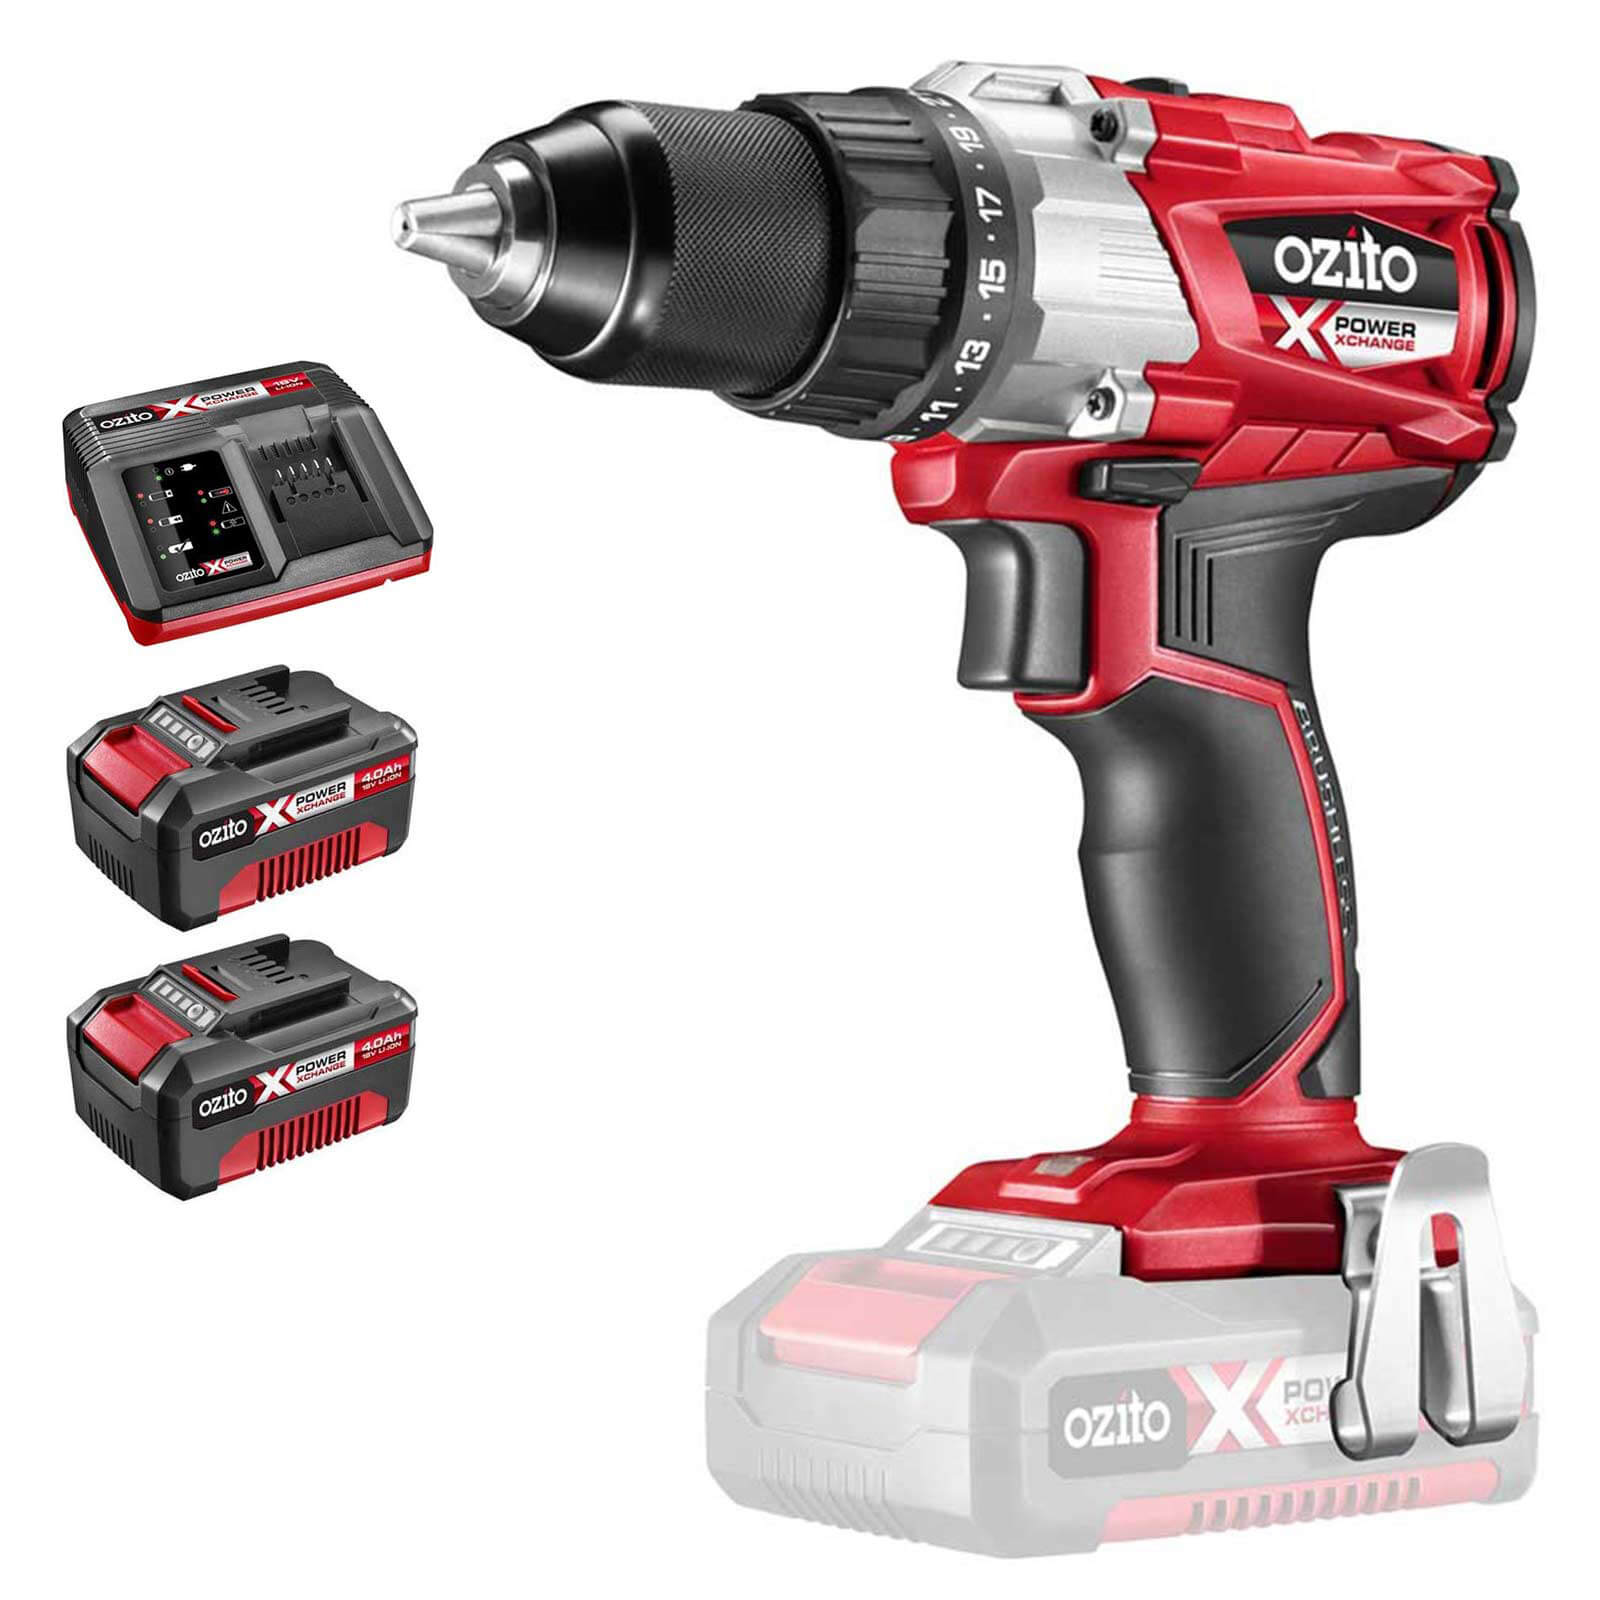 Image of Ozito PXBDS 18v Cordless Brushless Drill Driver 2 x 4ah Li-ion Charger No Case